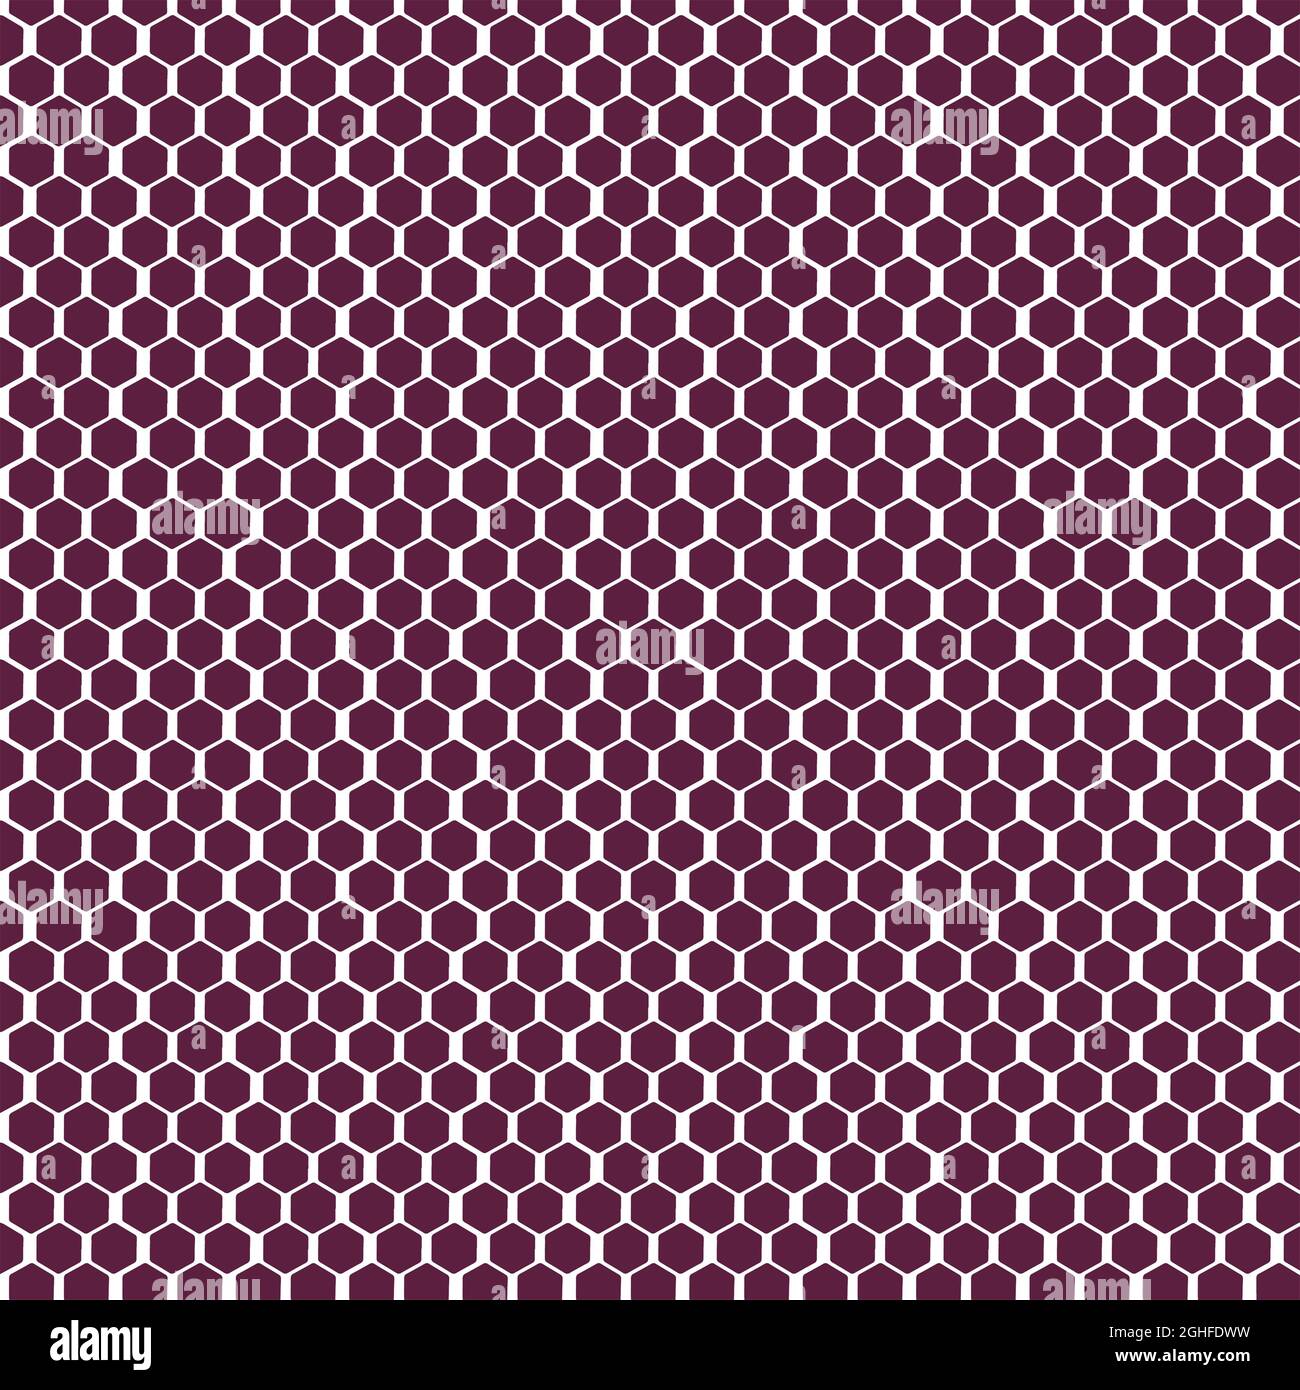 Burgundy honeycomb pattern with off white in small hexagon shapes in 12x12 design element for backgrounds. Stock Photo